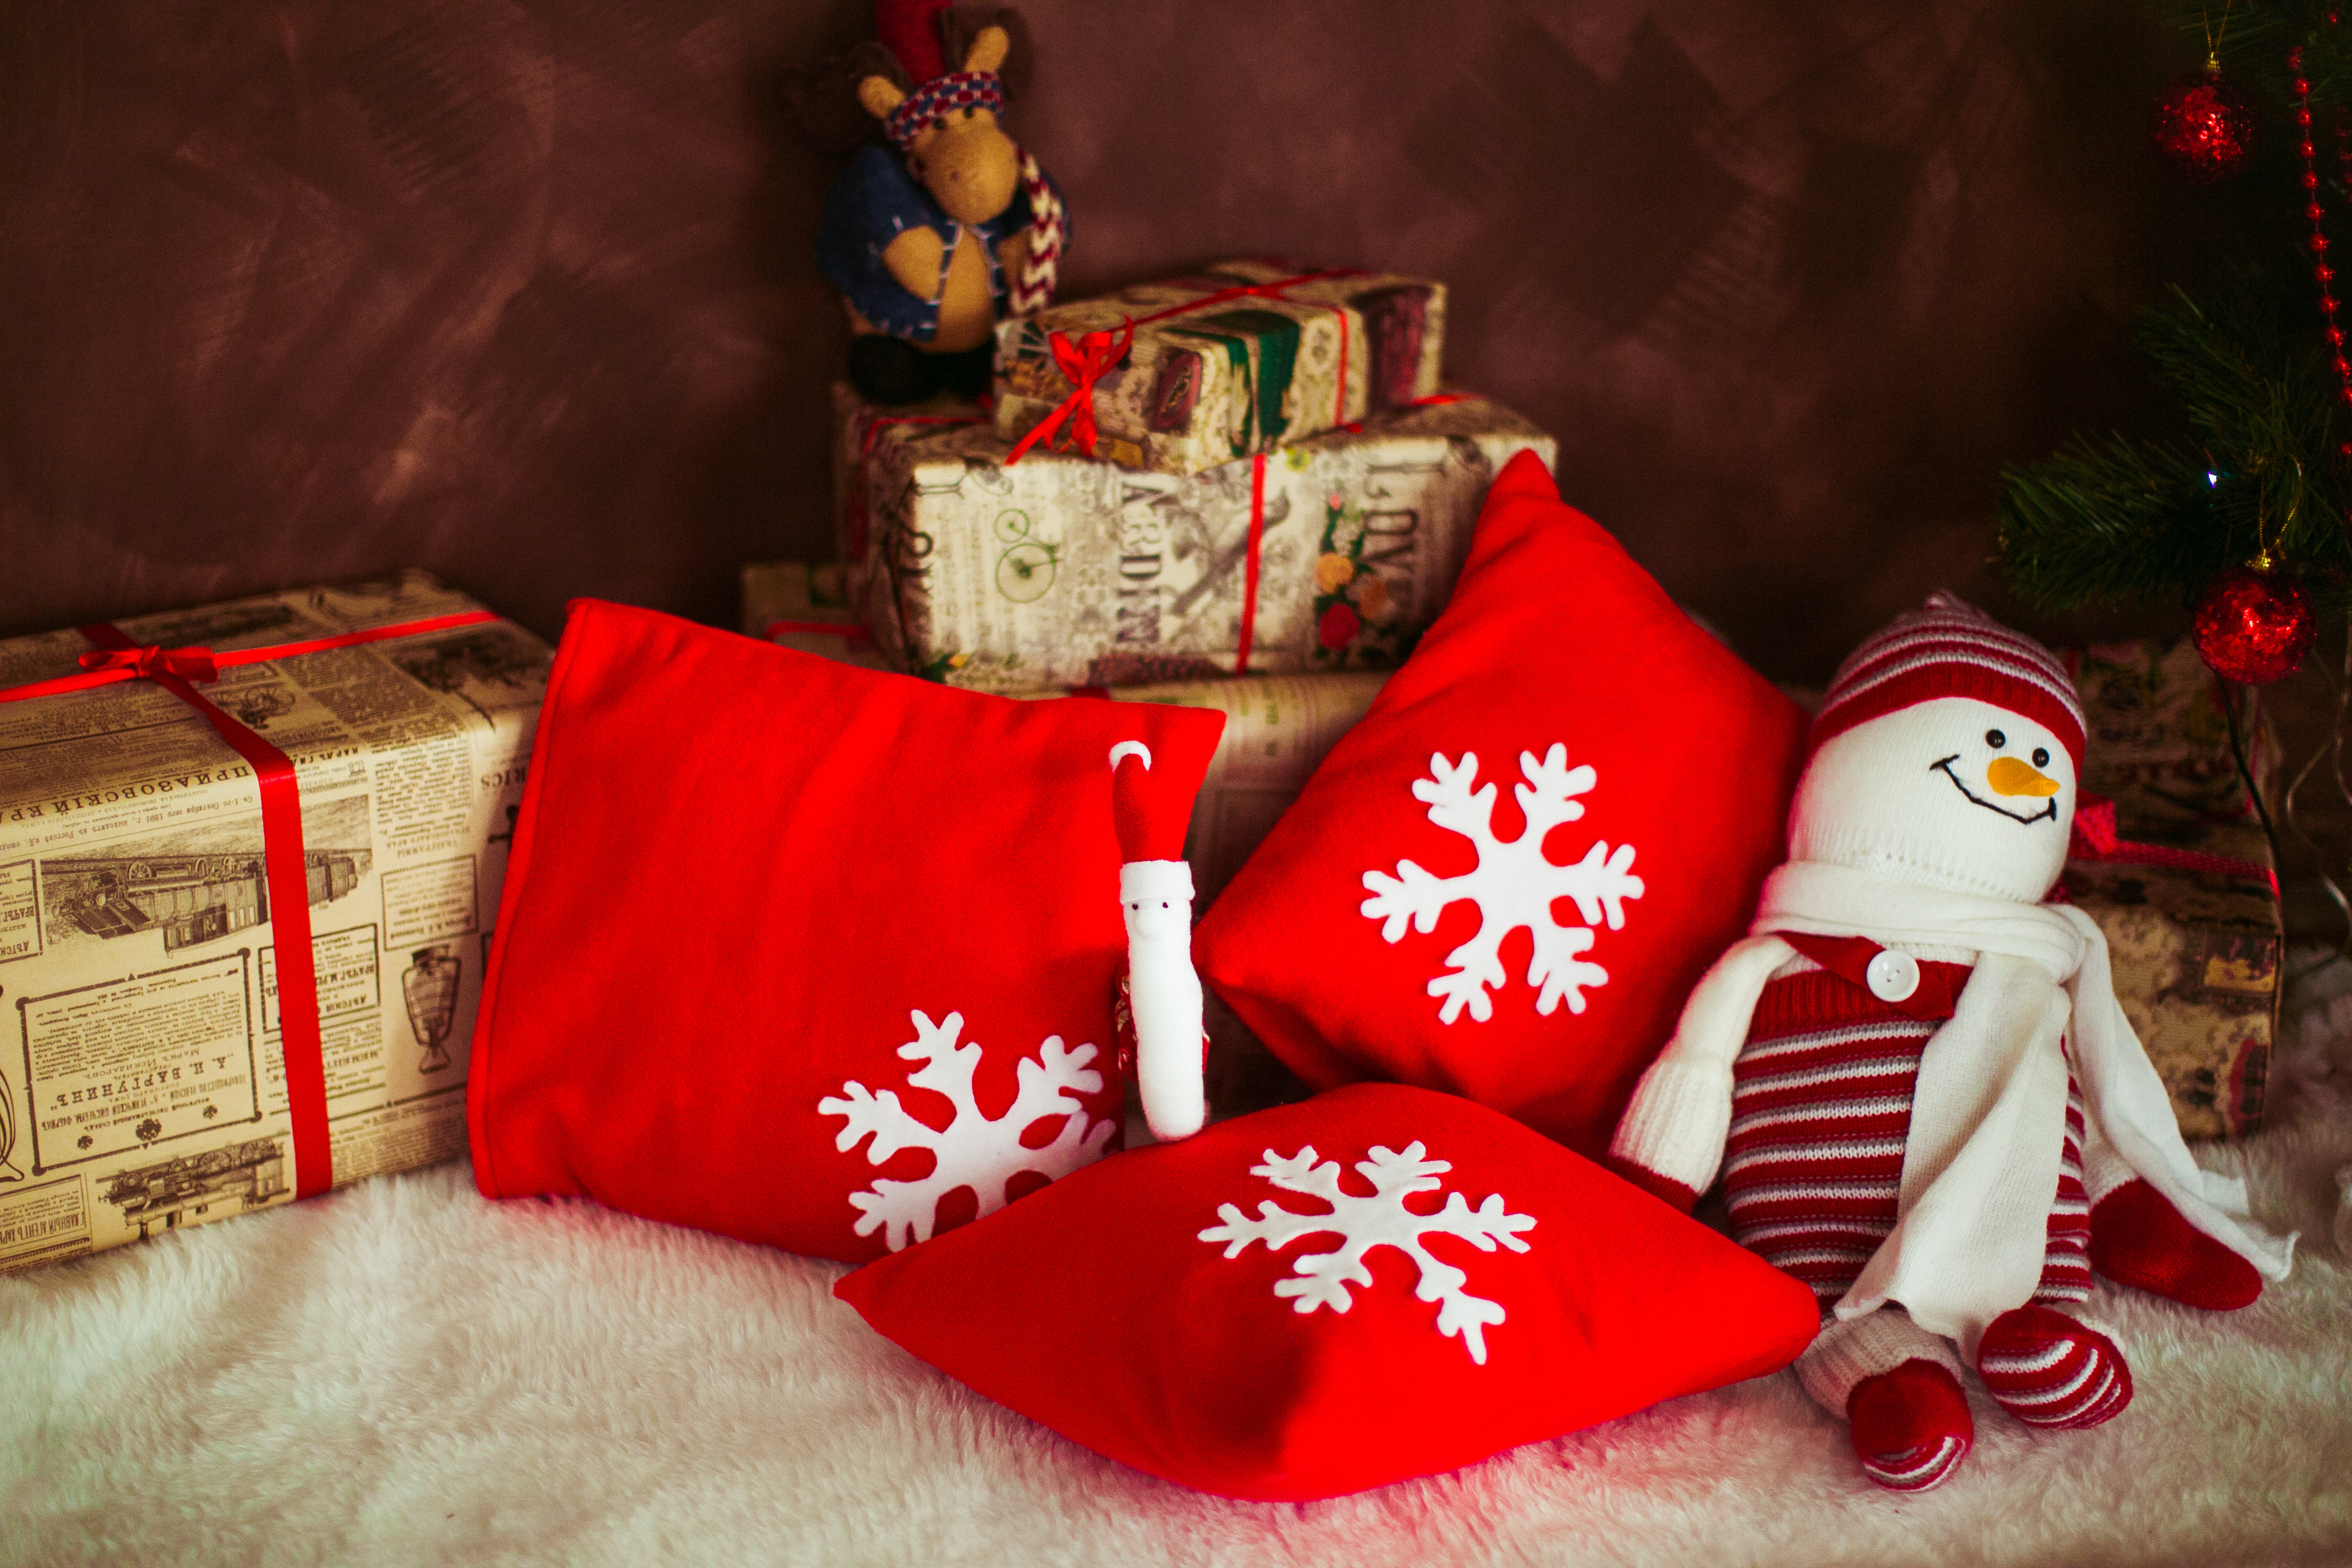 Red pillows with snowflakes and toy snowman lie on the floor